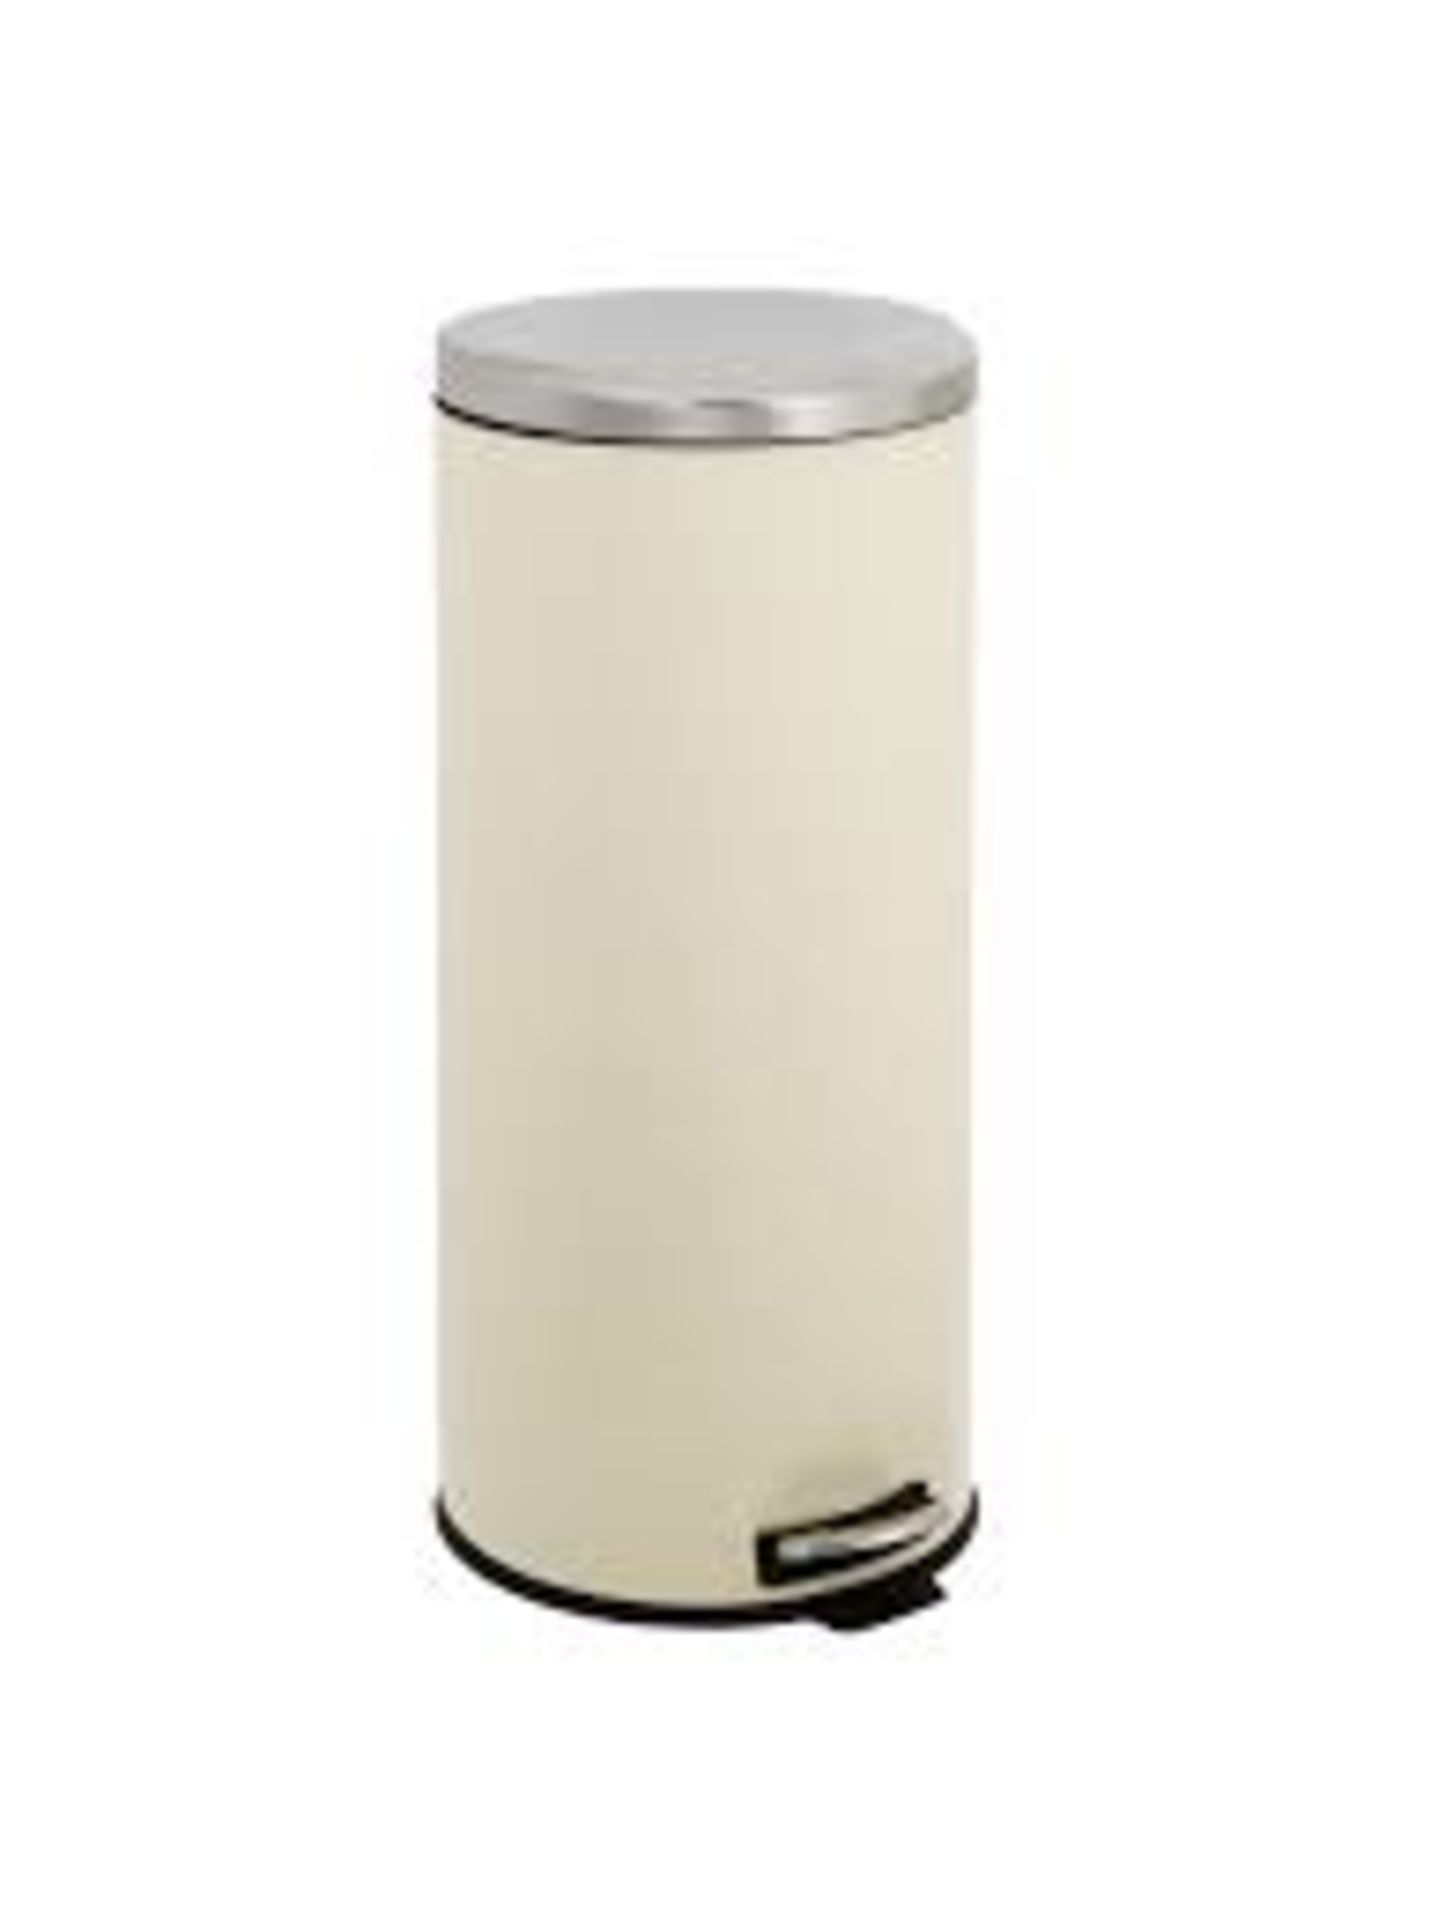 John Lewis & Partners 30 Litre Pedal Bin RRP £45 (890085) (Pictures Are For Illustration Purposes